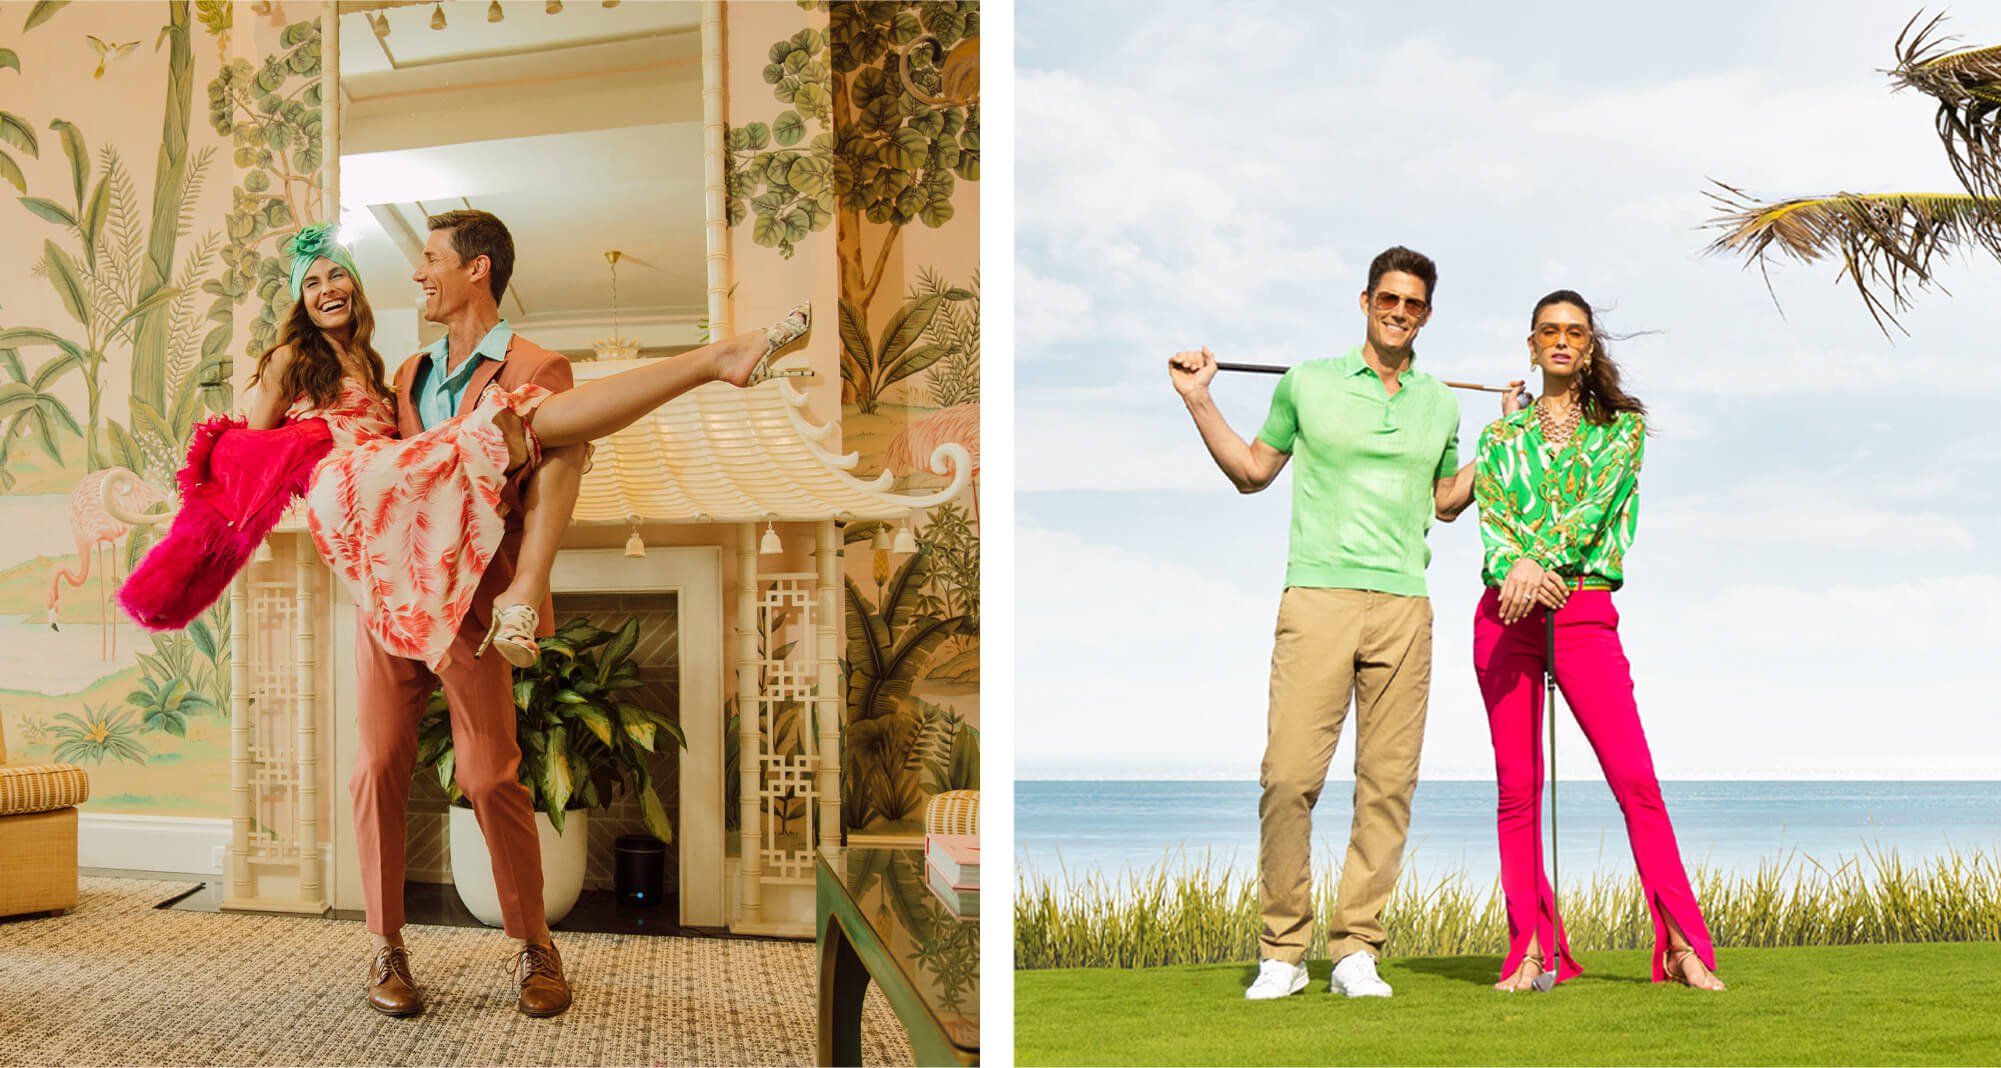 Jacober Creative Brand Identity for The Town of Palm Beach Marina. Collage of models in the golf course and hotel.